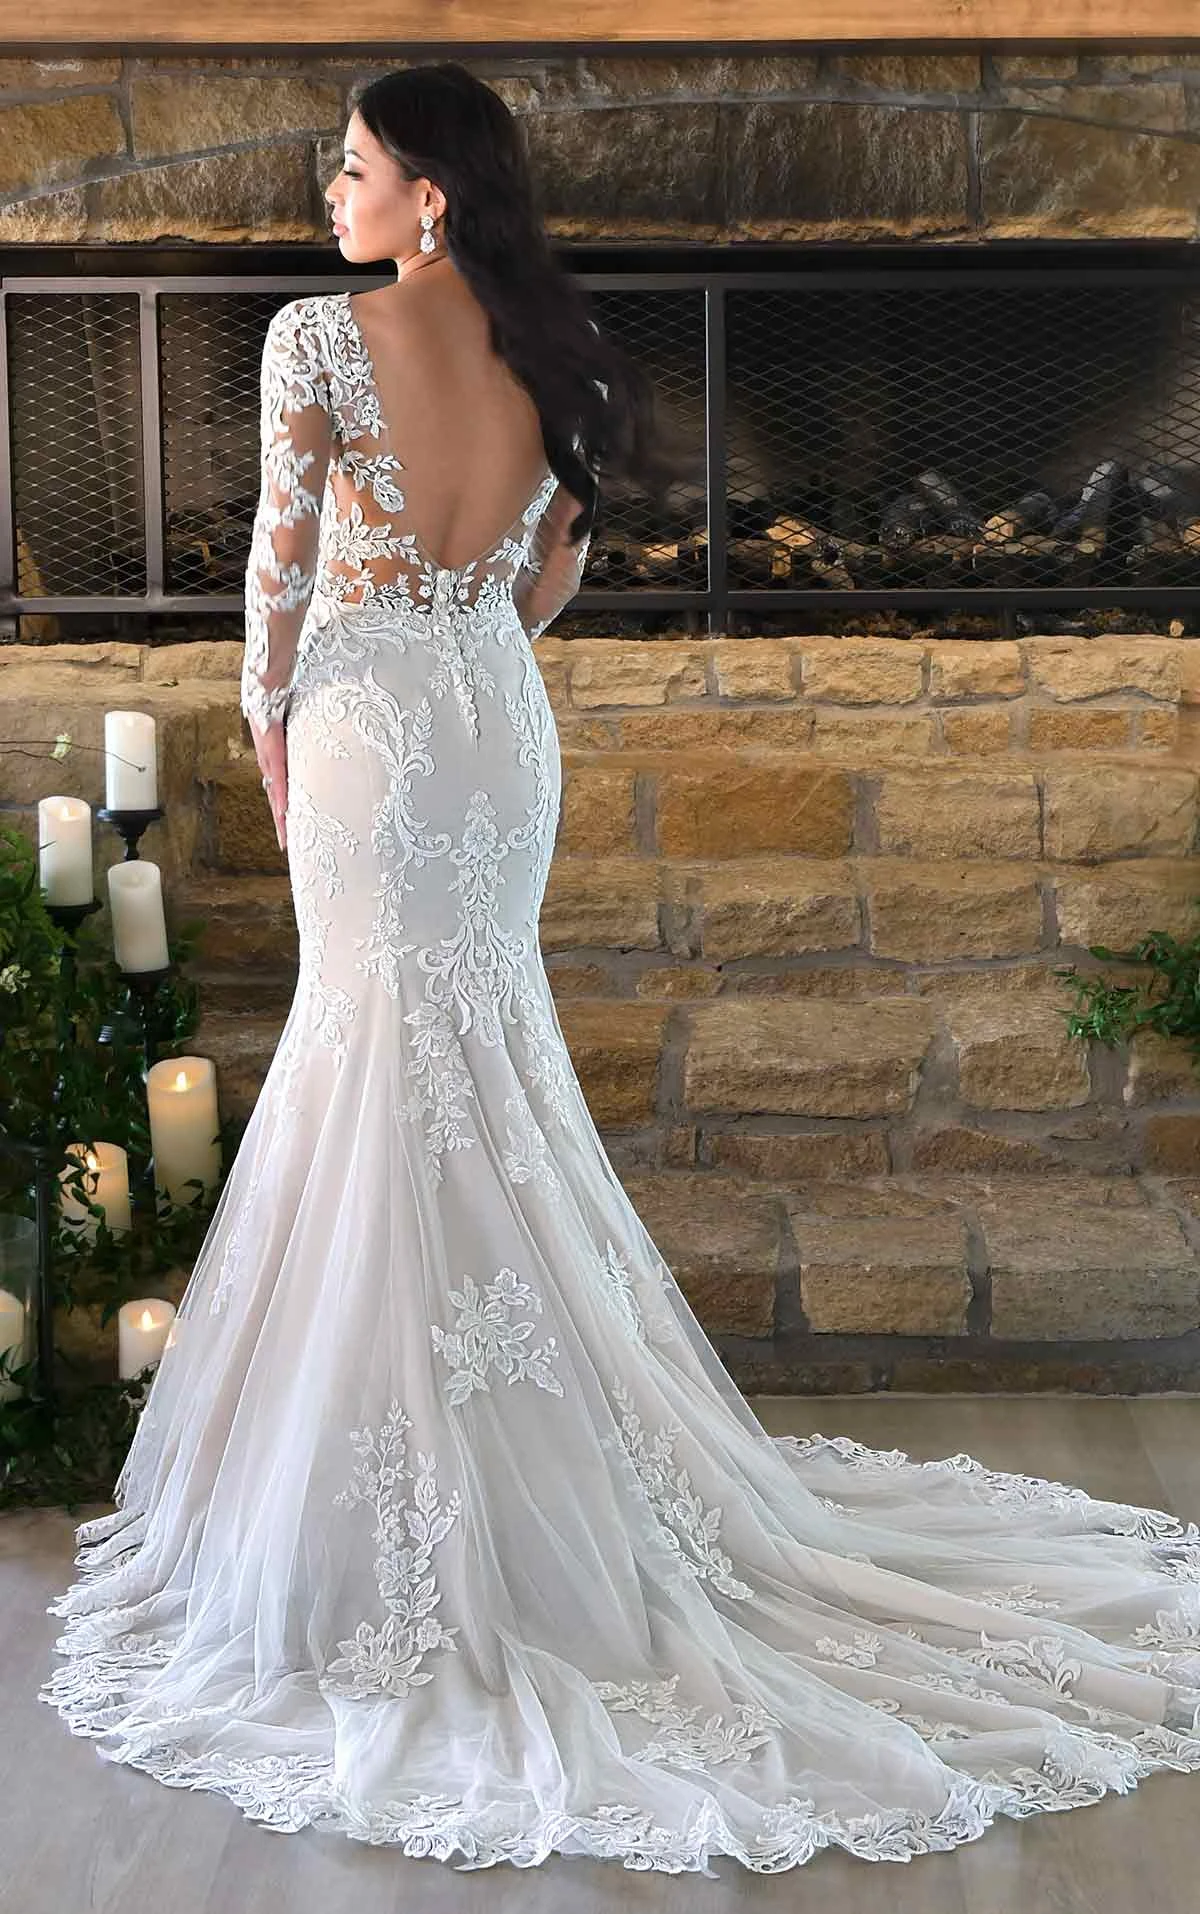 7420 Sexy Long-Sleeve Lace Wedding Dress with Cutouts and Full Train  by Stella York